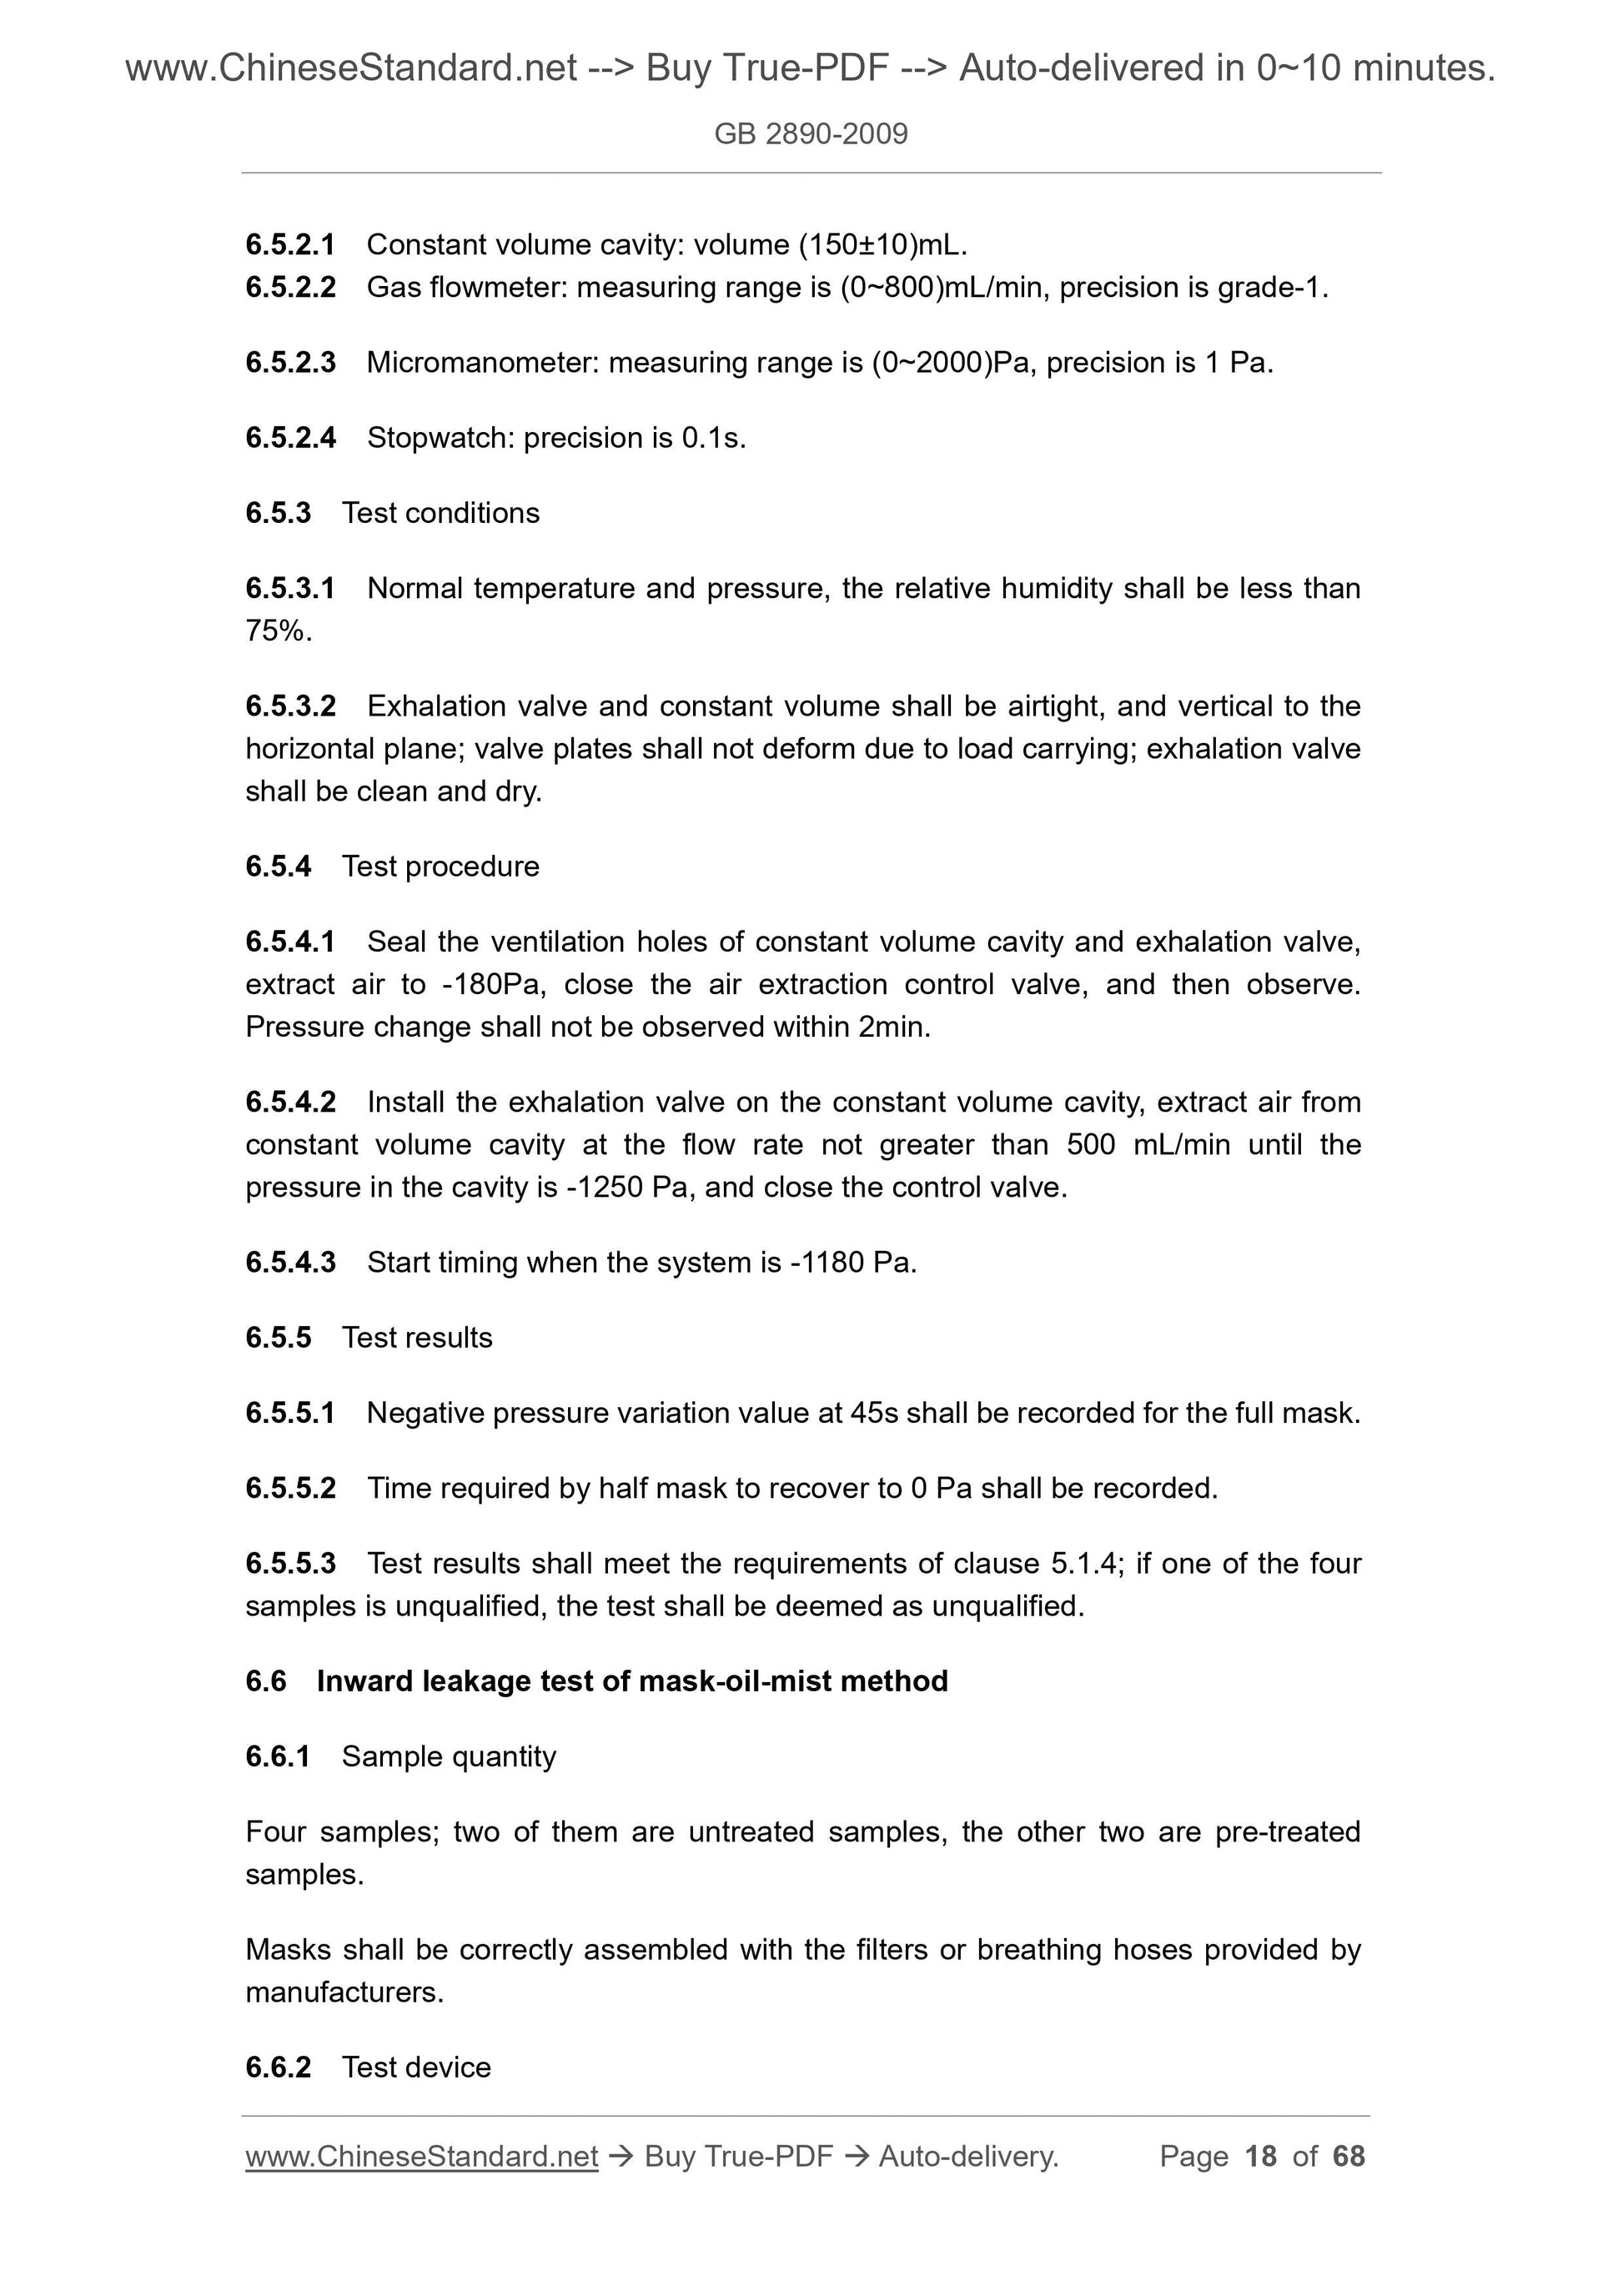 GB 2890-2009 Page 7